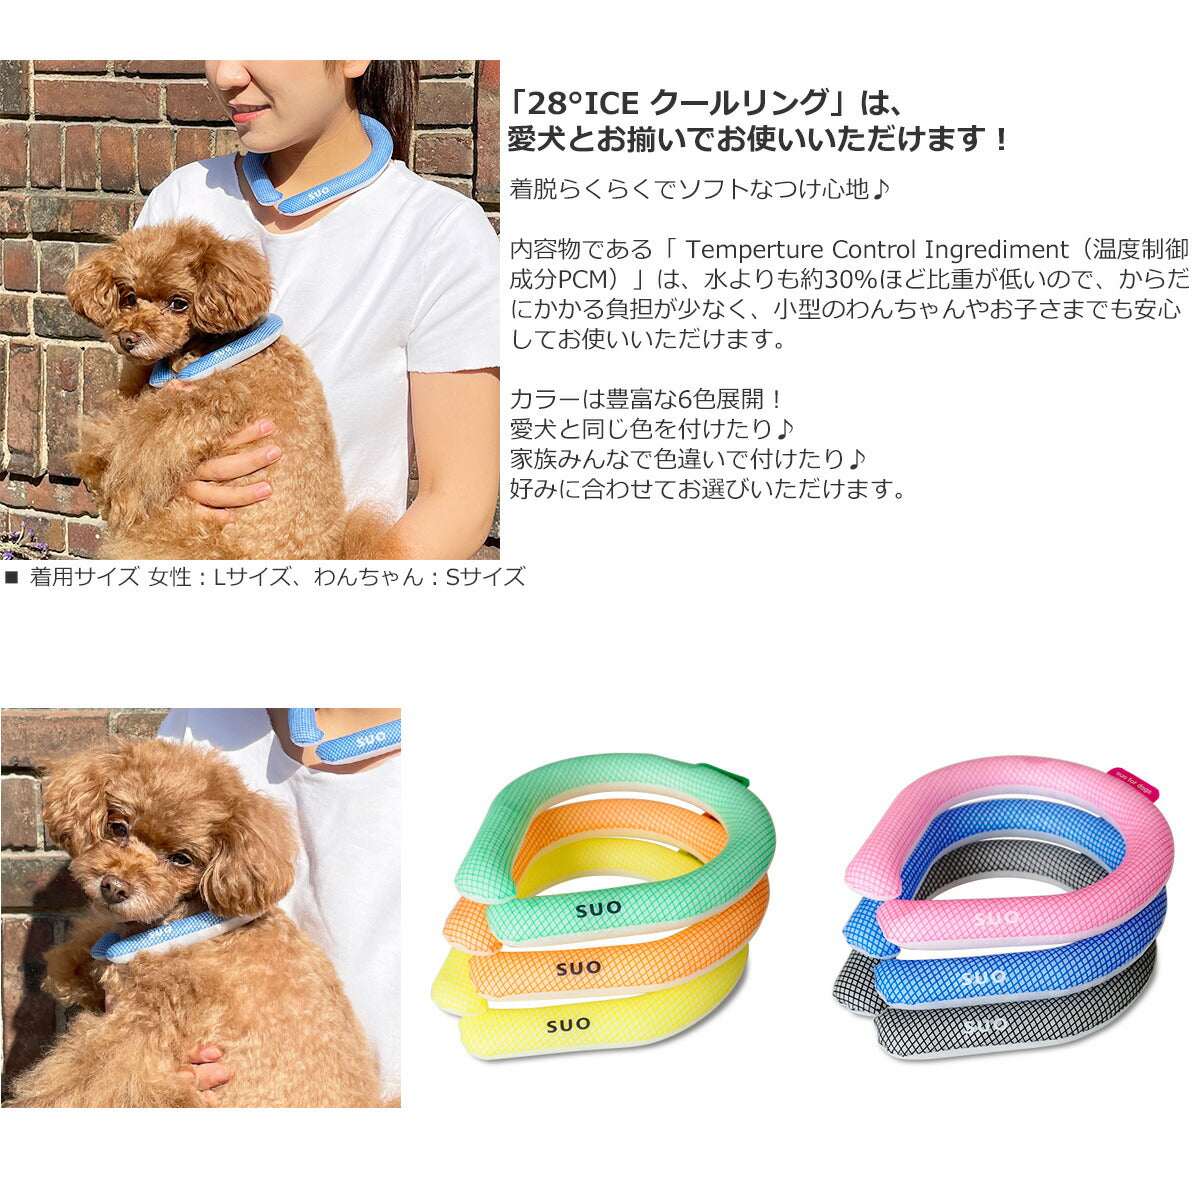 SUO for dogs 28°ICE SUOリング ボタンなし M グリーン 熱中症対策グッズ 暑さ対策 ひんやり 首 冷感 犬 大人 子供